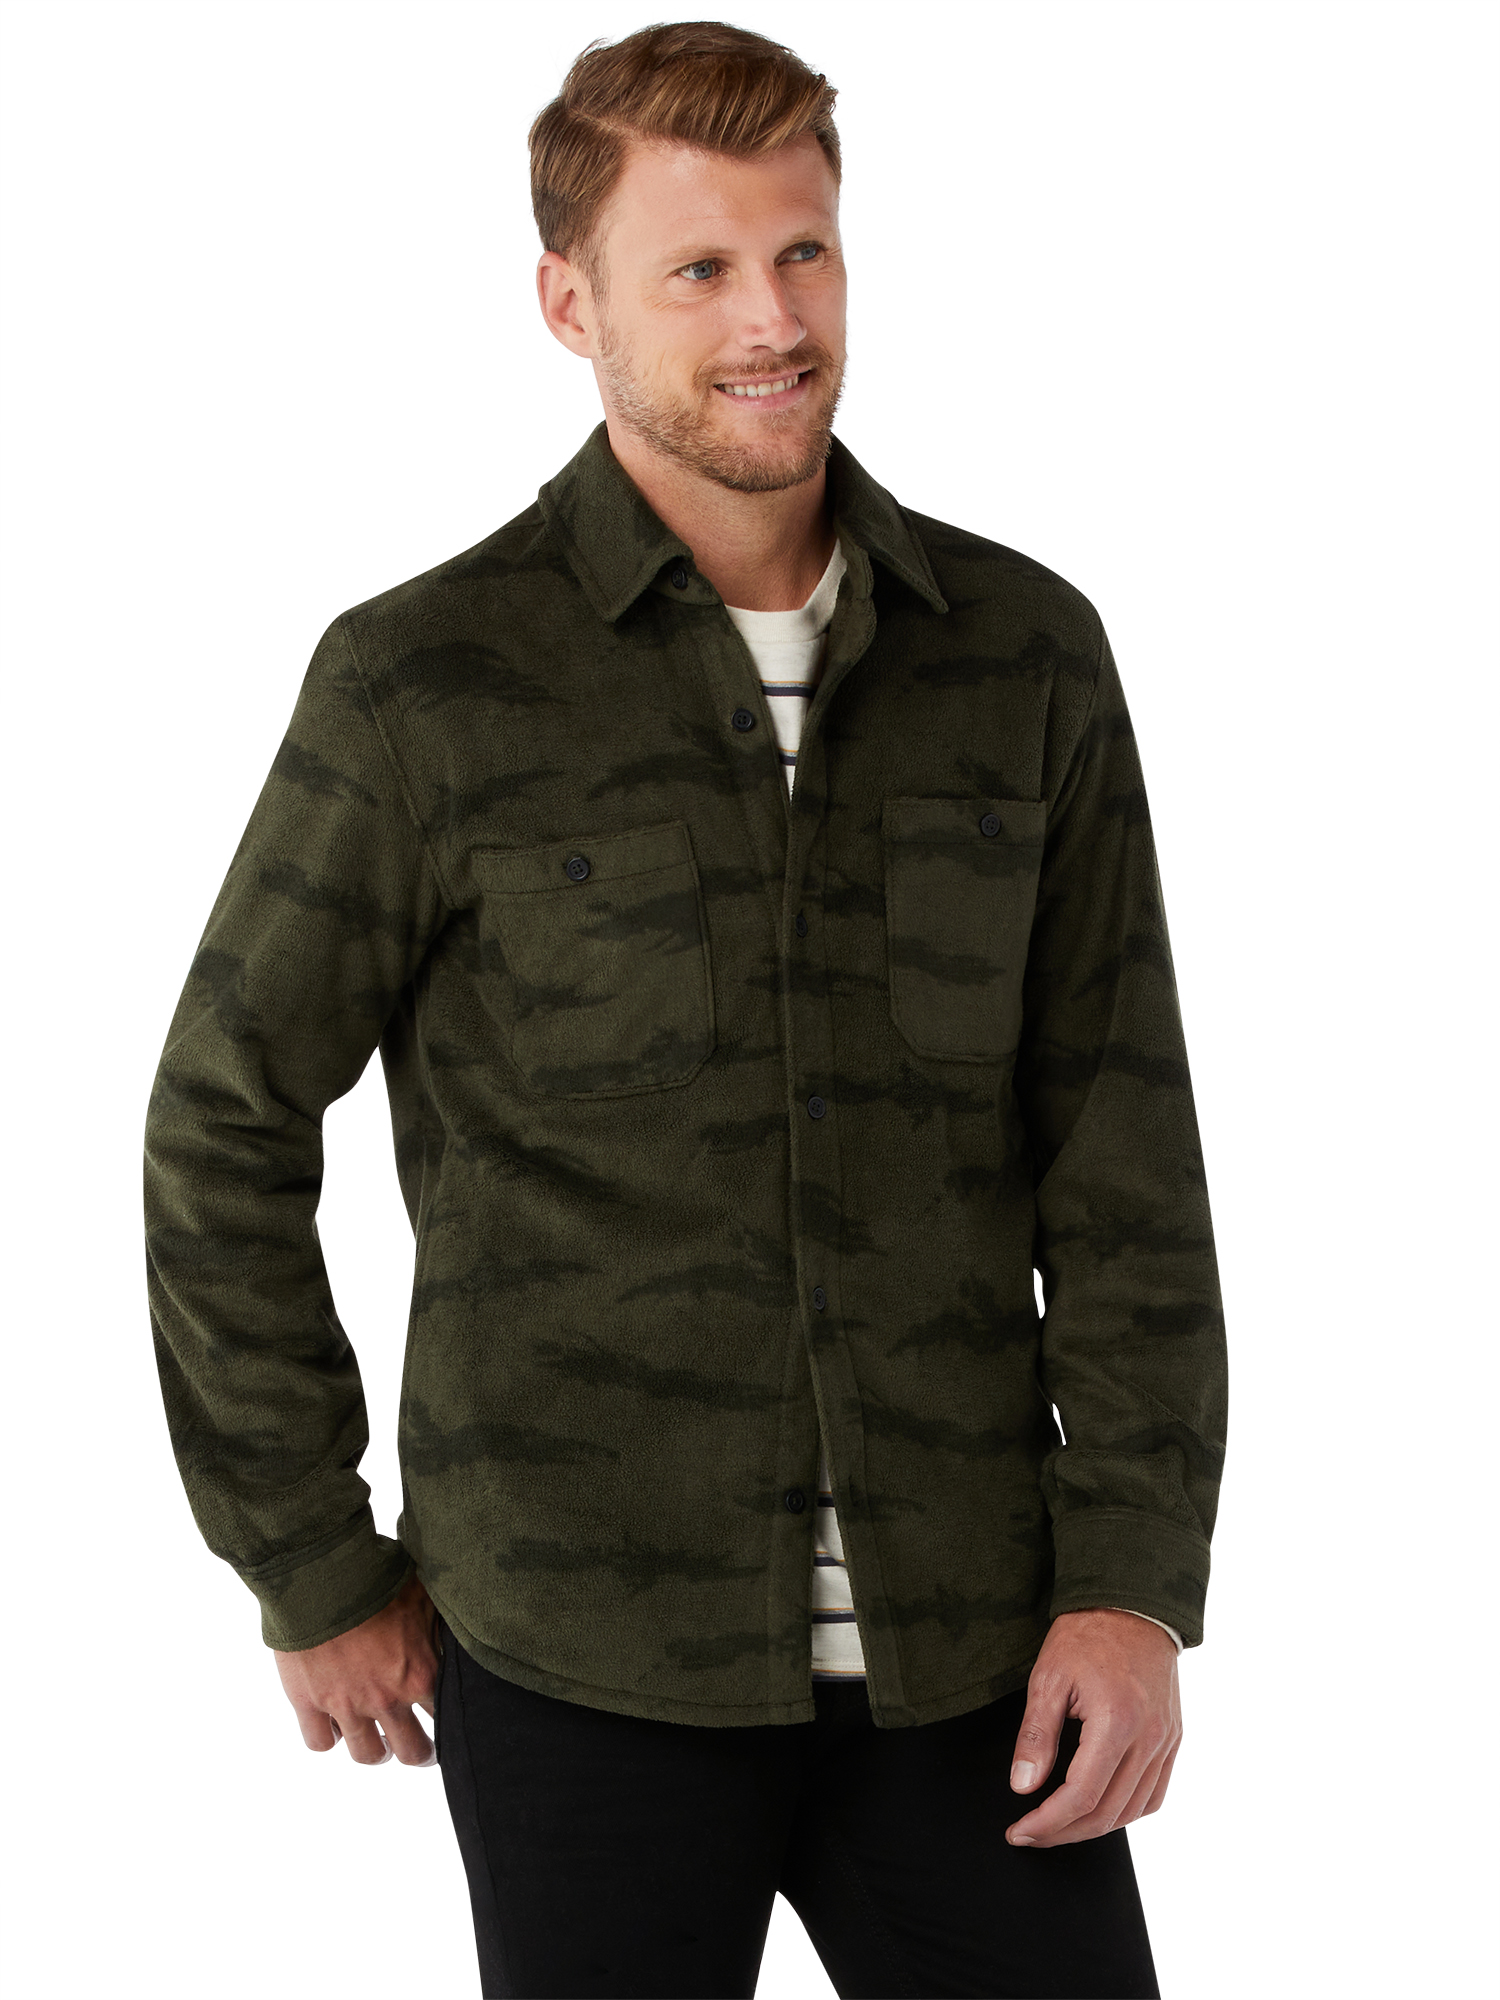 Free Assembly Men's Fleece Shirt with Two Pockets - image 5 of 6